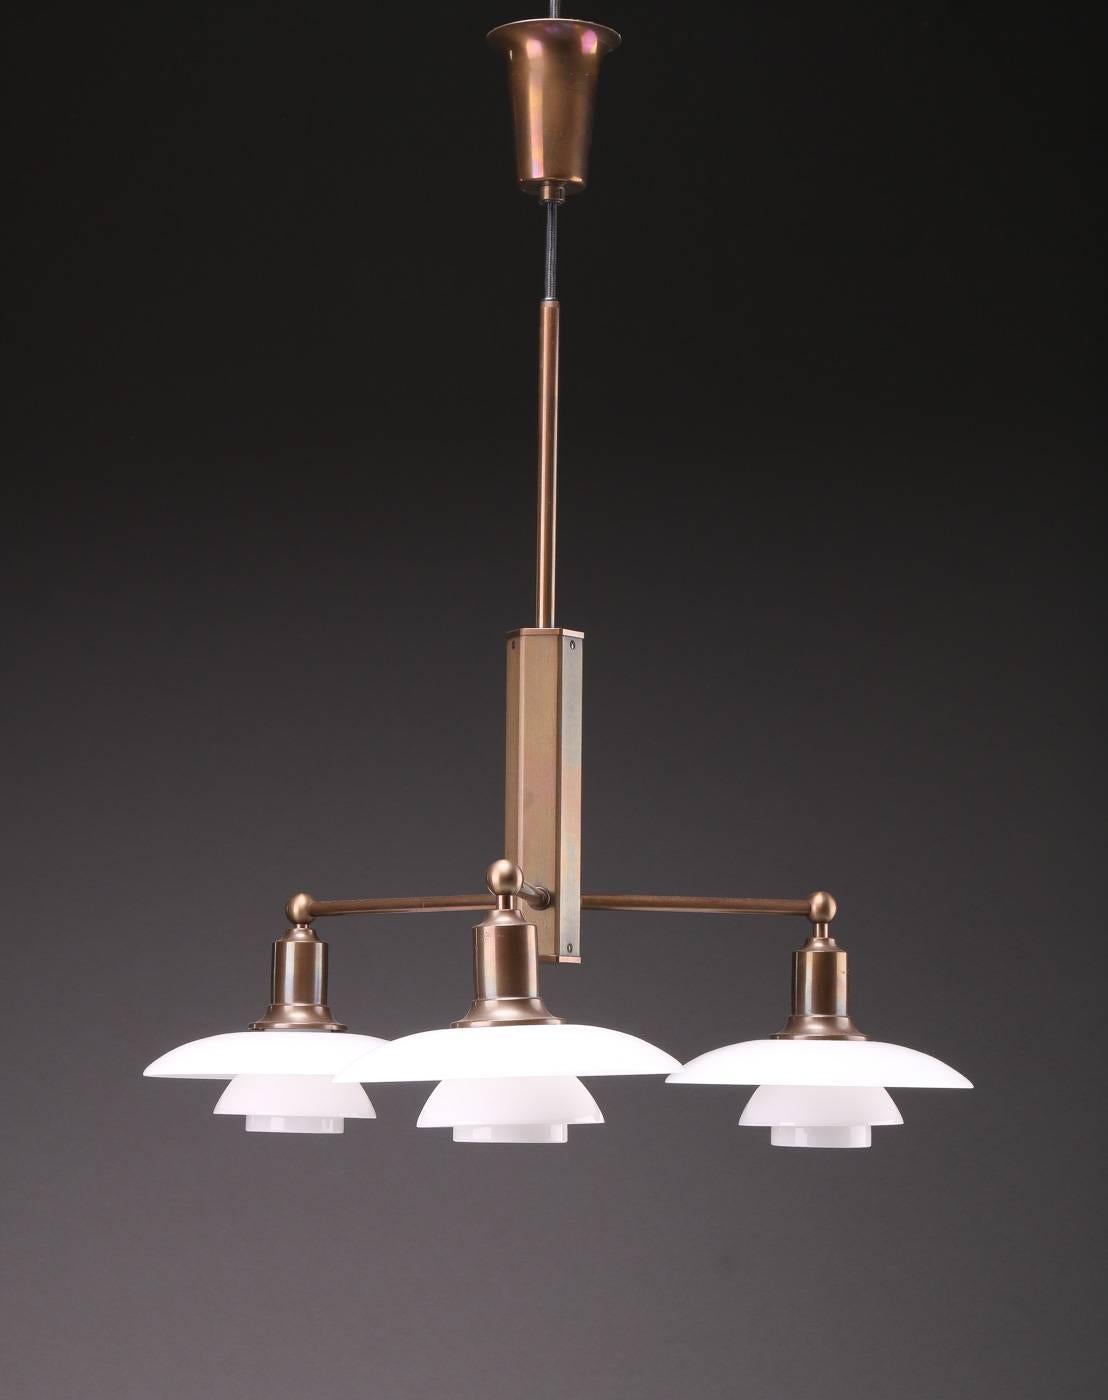 Poul Henningsen 1894-1967. PH stem fitting, browned brass, three branches with 2/1 shade in white opal glass. Produced by Louis Poulsen for a limited time and is no longer in production. Traces of marks on one arm.